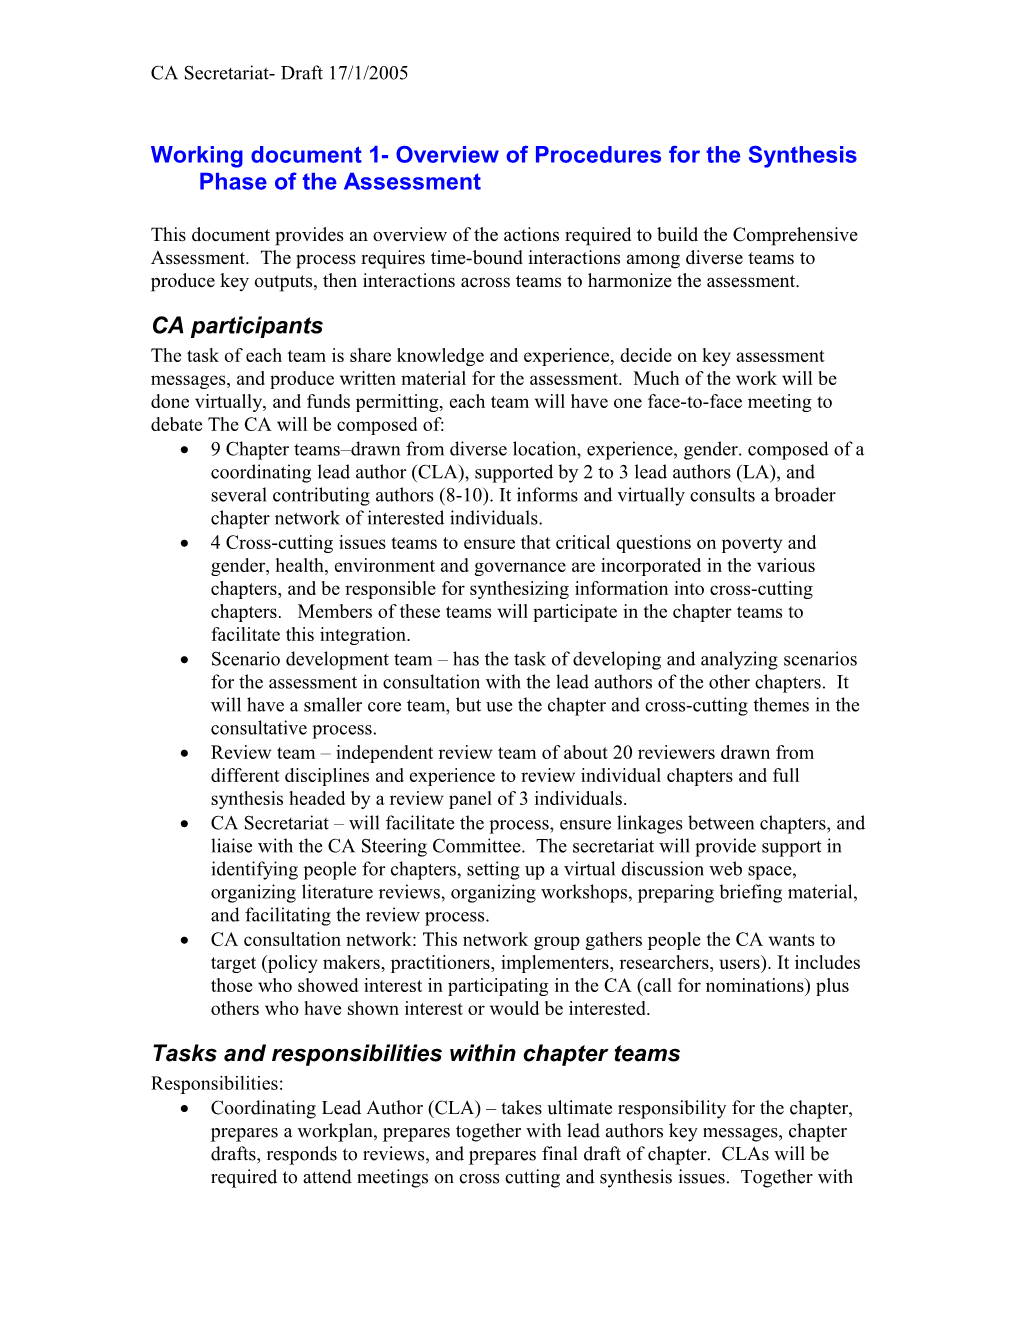 Overview of Procedures for the Synthesis Phase of the Assessment